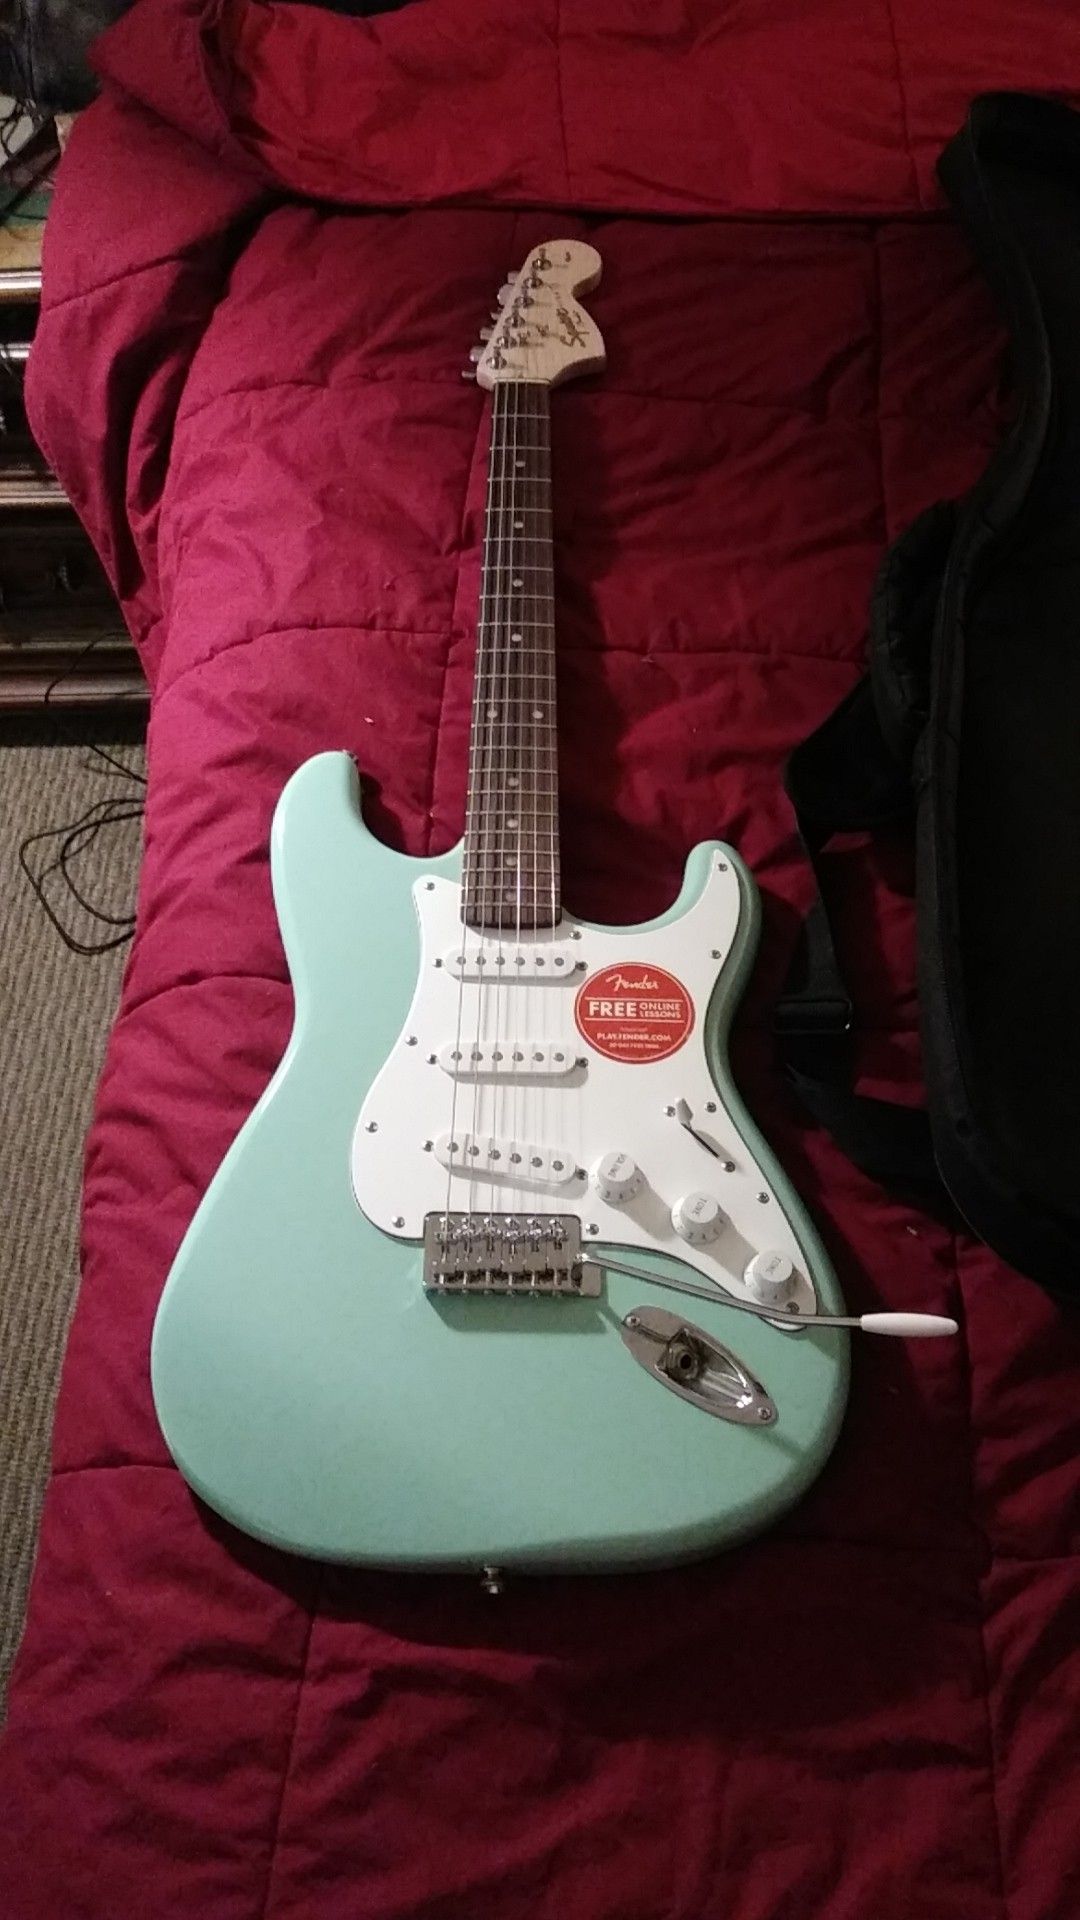 Fender electric guitar with carrying case and picks/amp cord